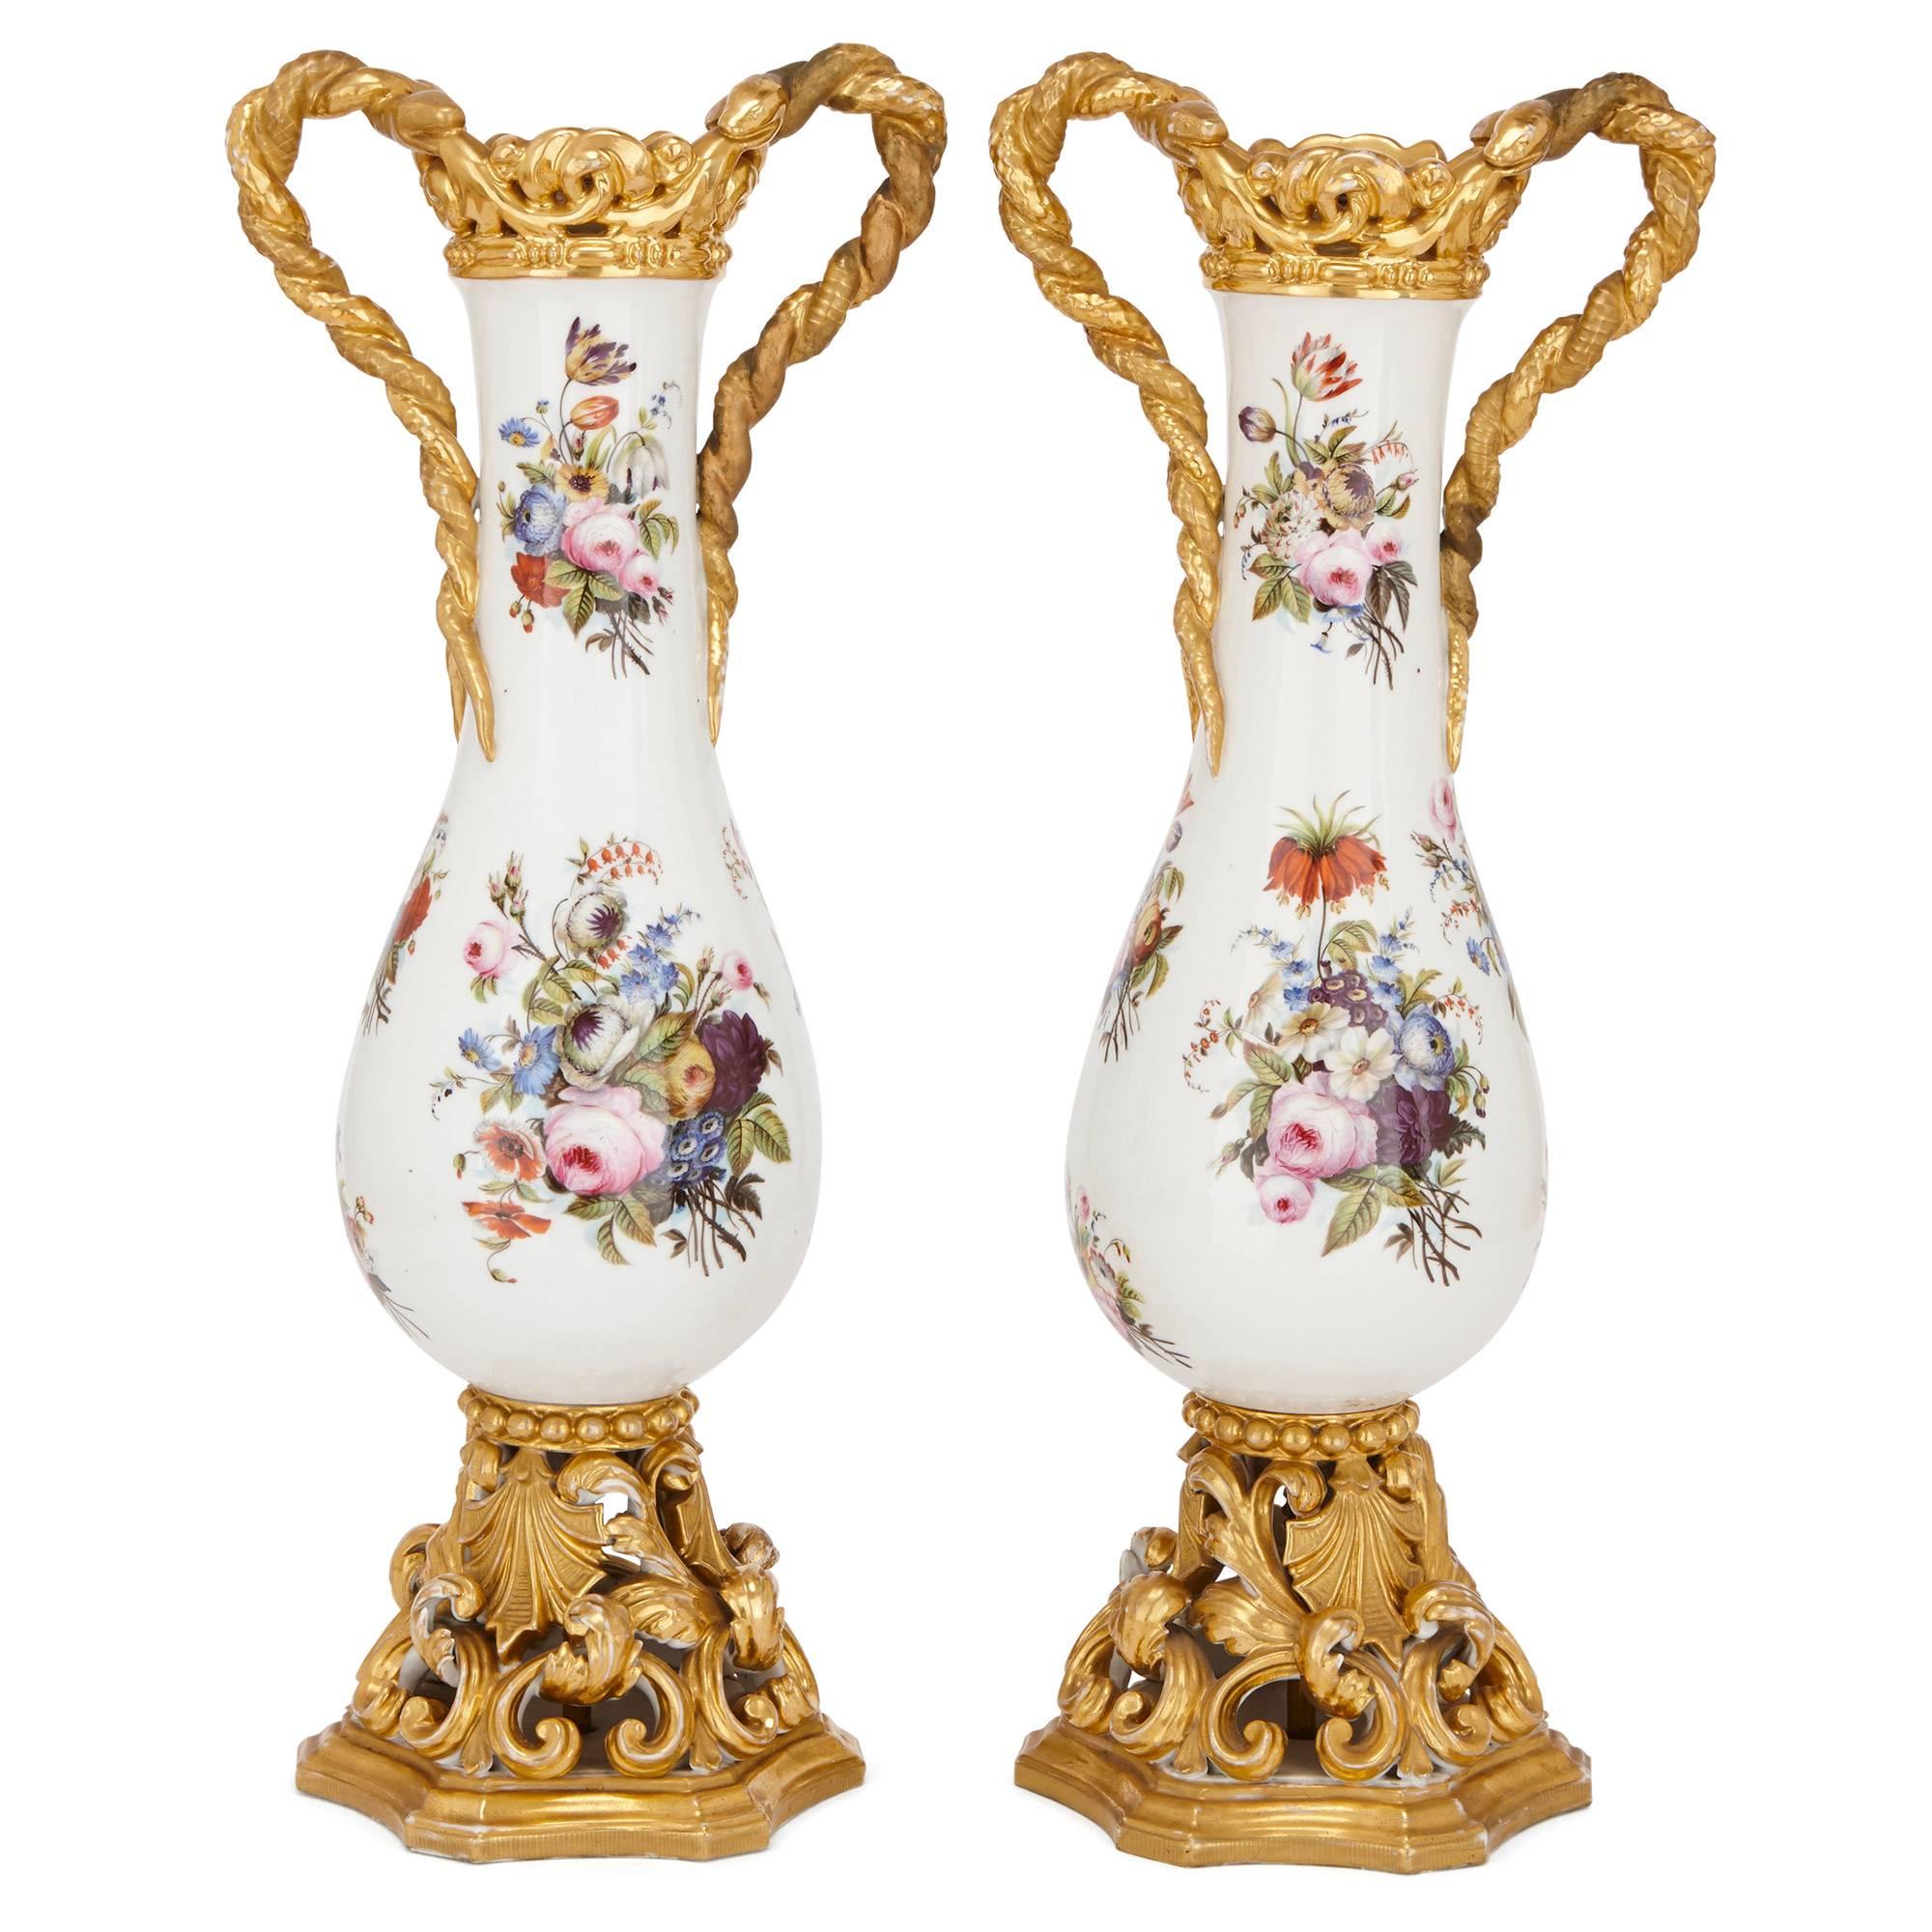 Jacob Petit was perhaps the pre-eminent porcelain artist of the first half of the 19th century in France, and these Belle Époque period floral vases are a clear homage to his innovative techniques. Perhaps the most striking feature of the vases are